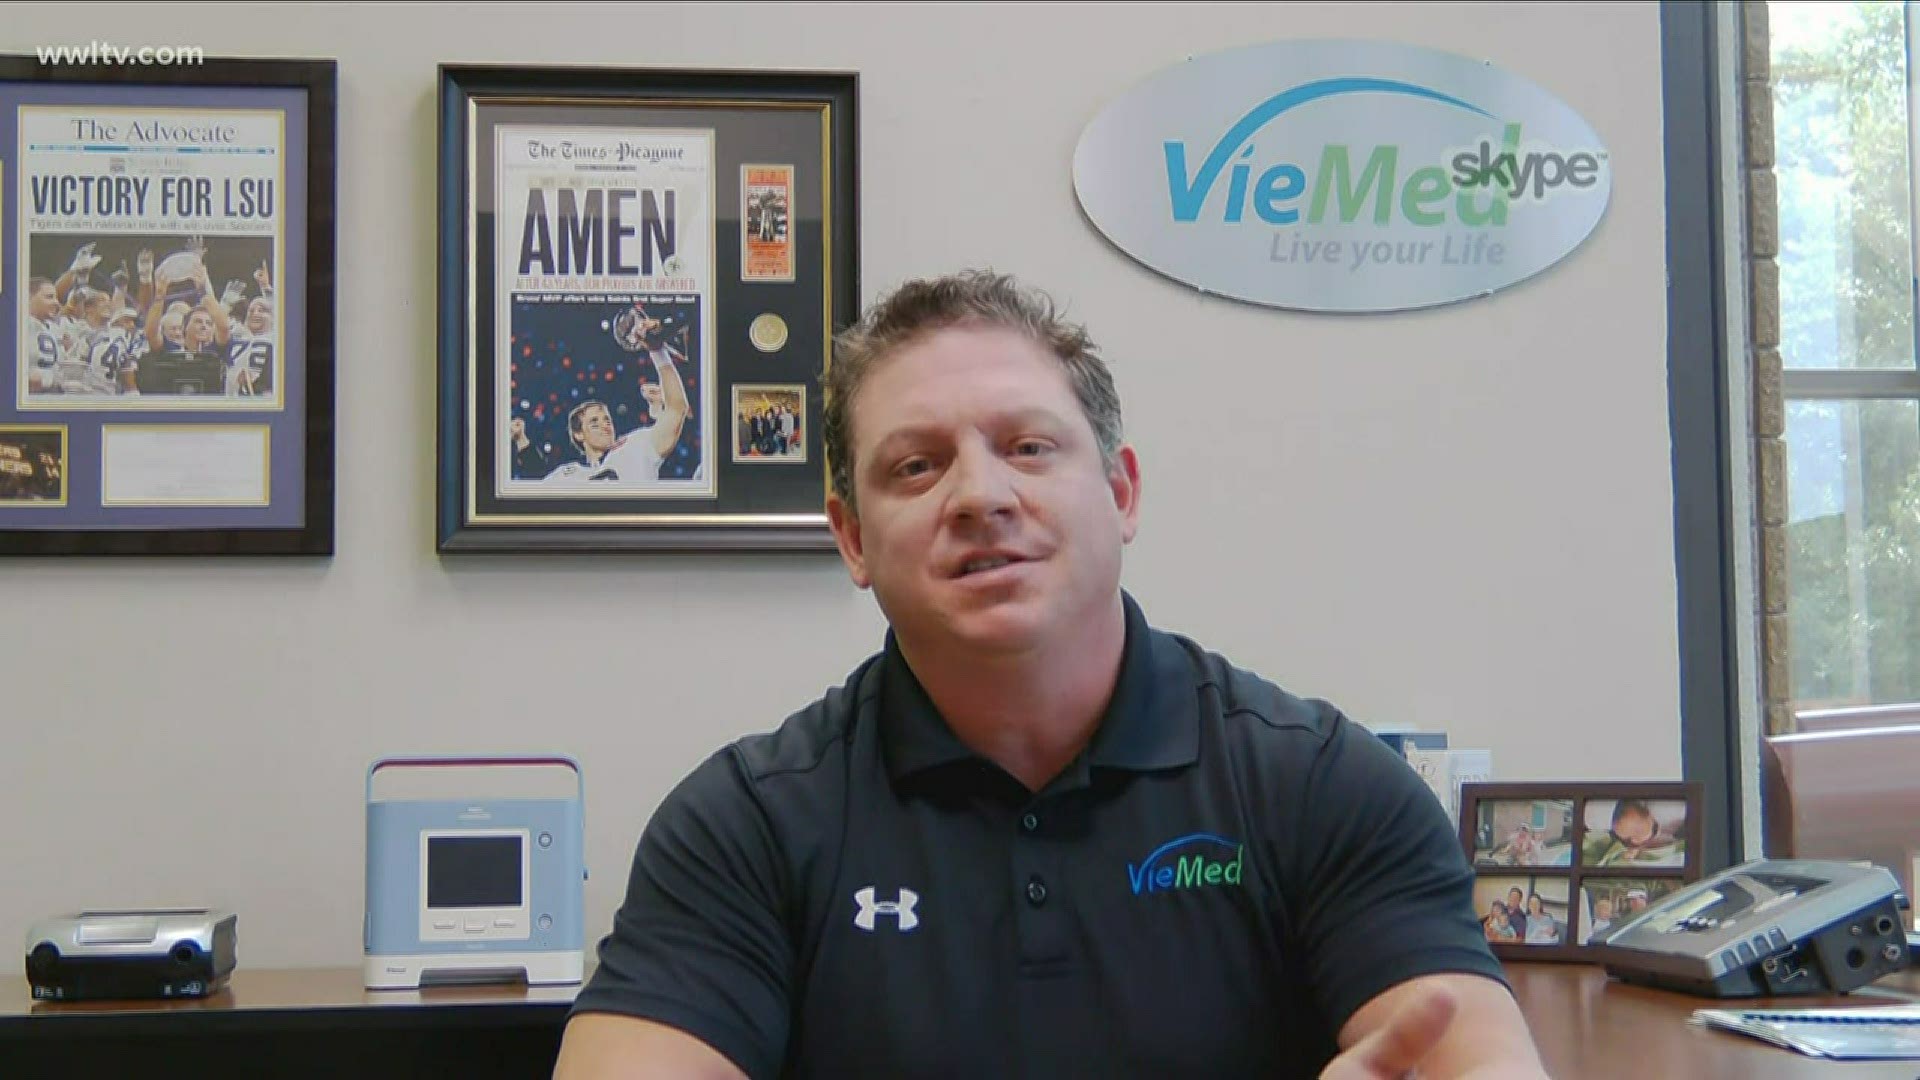 Casey Hoyt, CEO of VieMed Healthcare, talks about what the Louisiana-based distributor has been doing to support hospitals battling the coronavirus around the U.S.